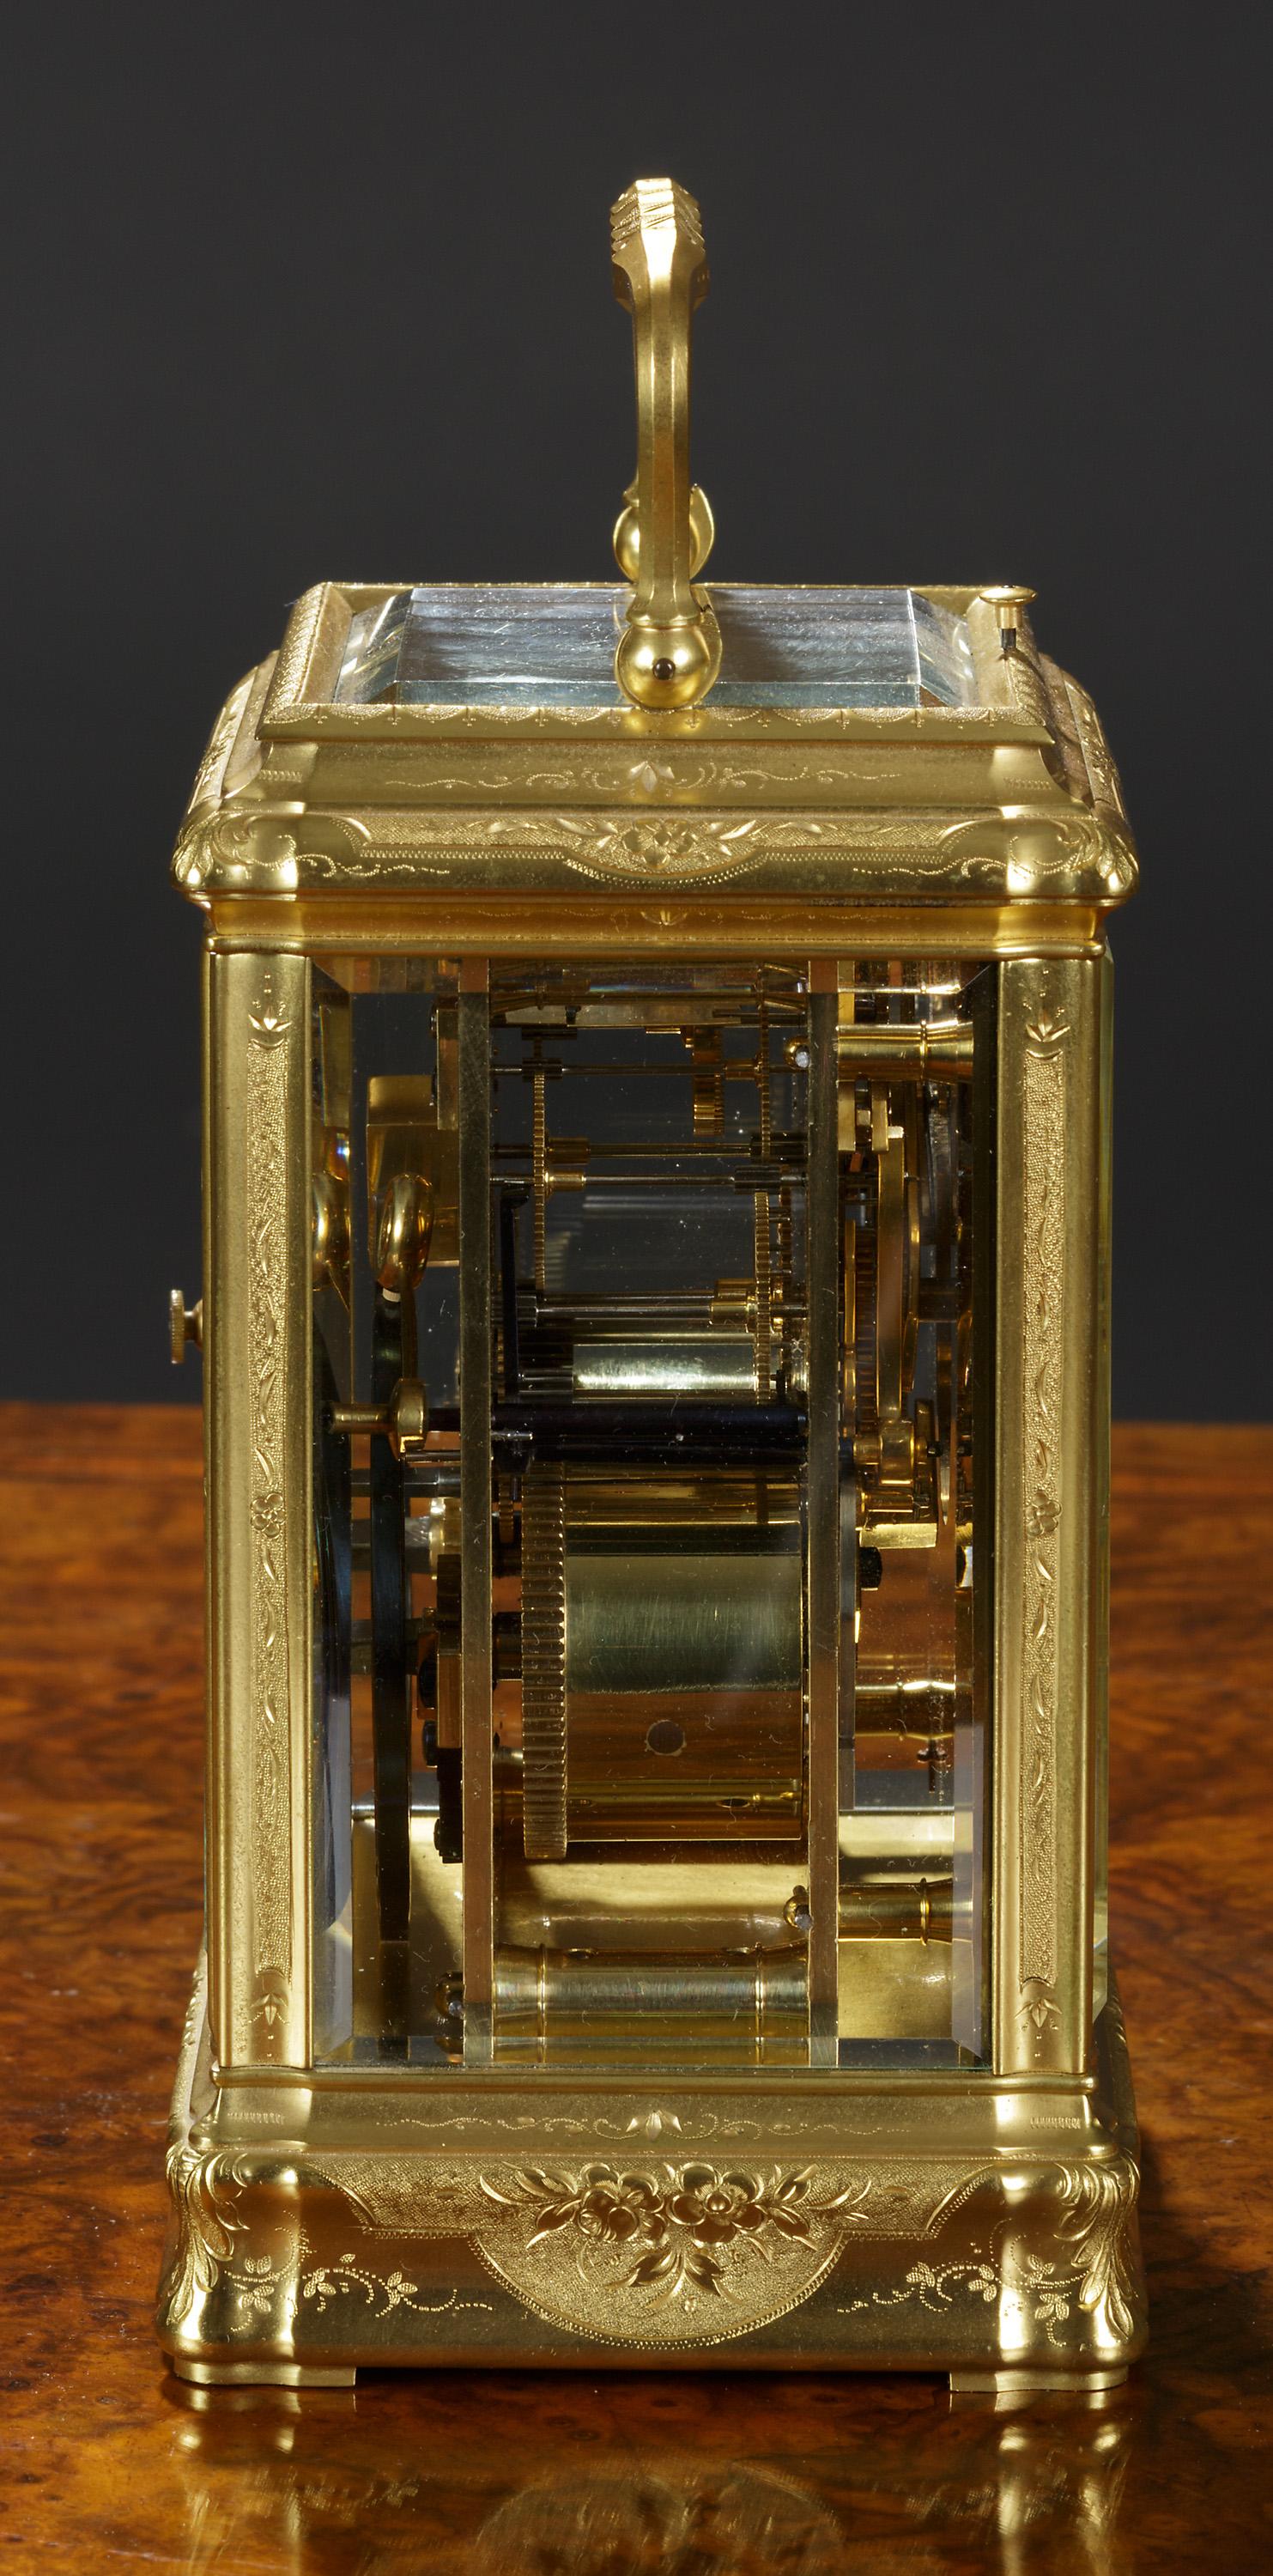 French gilded brass carriage clock in a beautifully engraved gorge case with foliate scrolls and swags with ornate carrying handle. Bevelled glass to all panels with large viewing aperture to the top giving way to a silvered lever platform